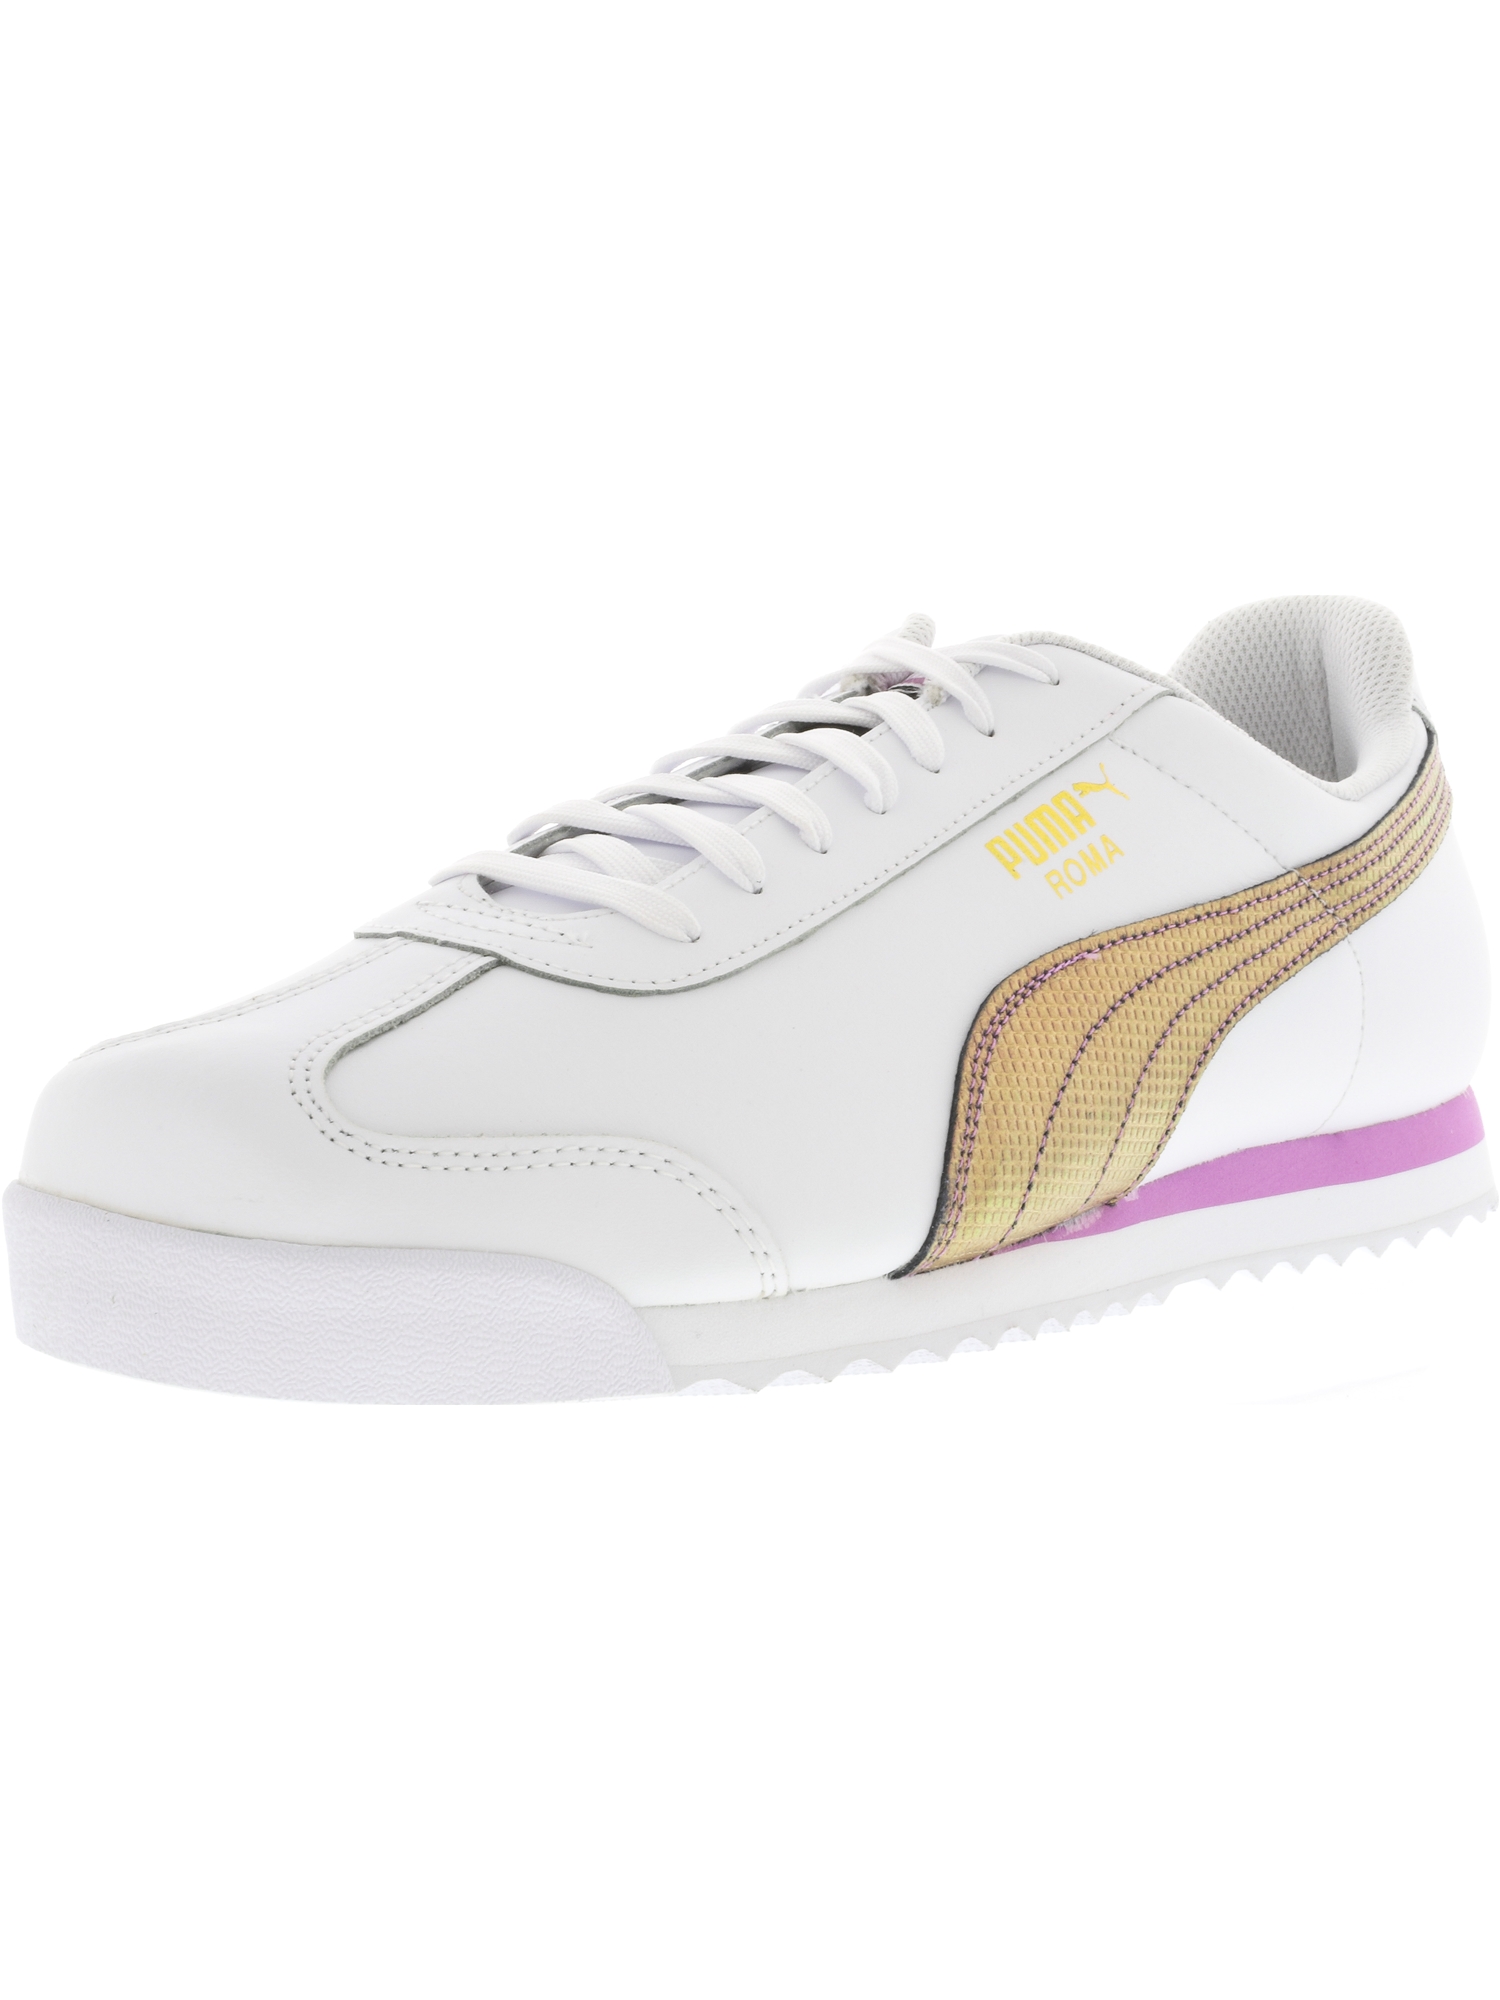 Puma Men's Roma Basic Holo White / Gold Ankle-High Leather Fashion Sneaker - 12M - image 1 of 1